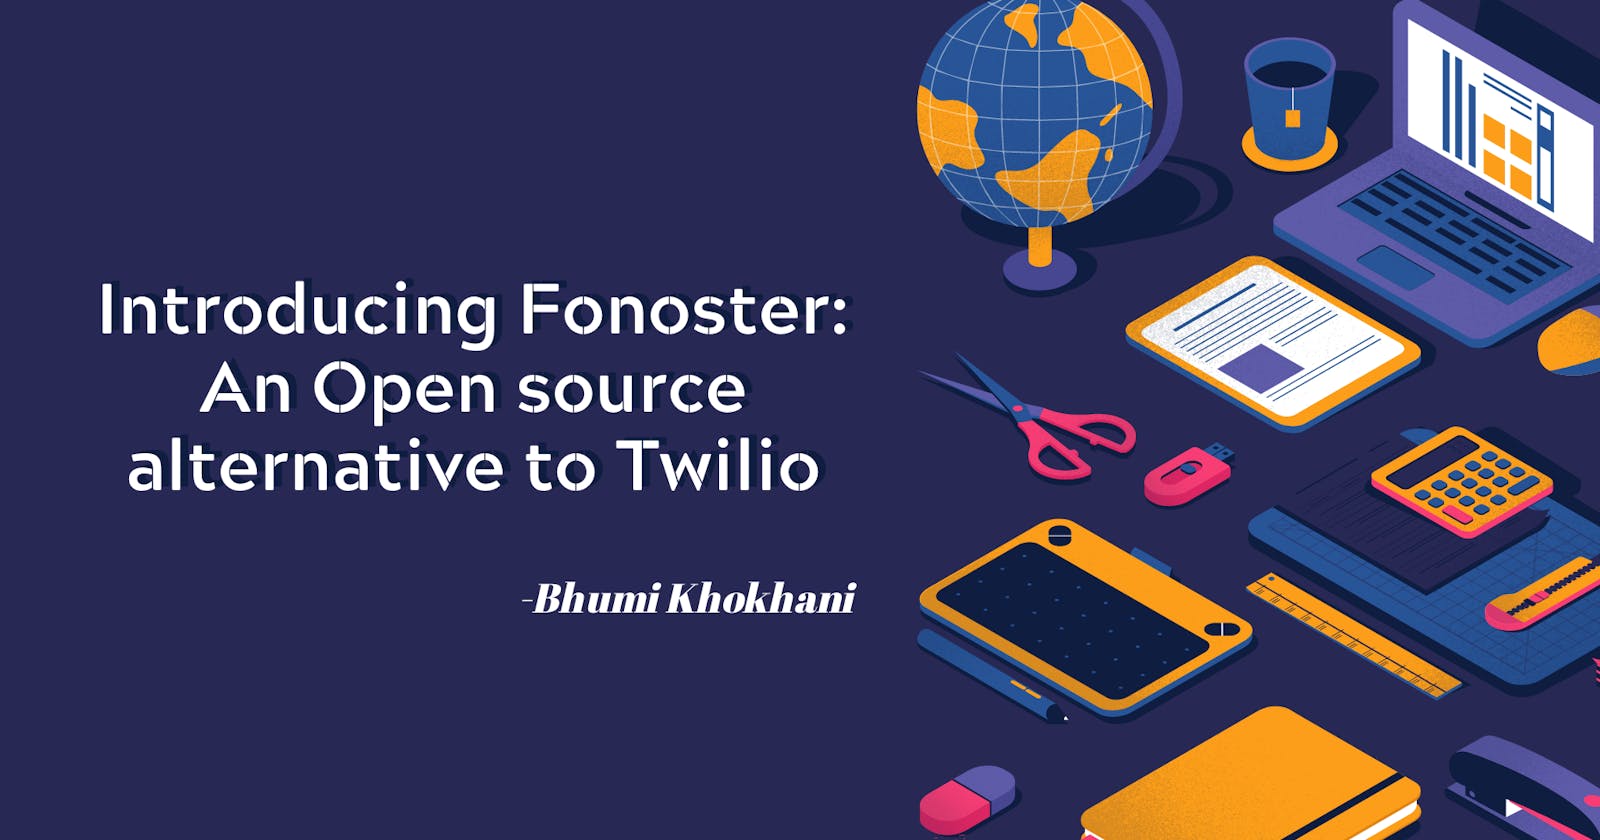 Introducing Fonoster: An Open source alternative to Twilio